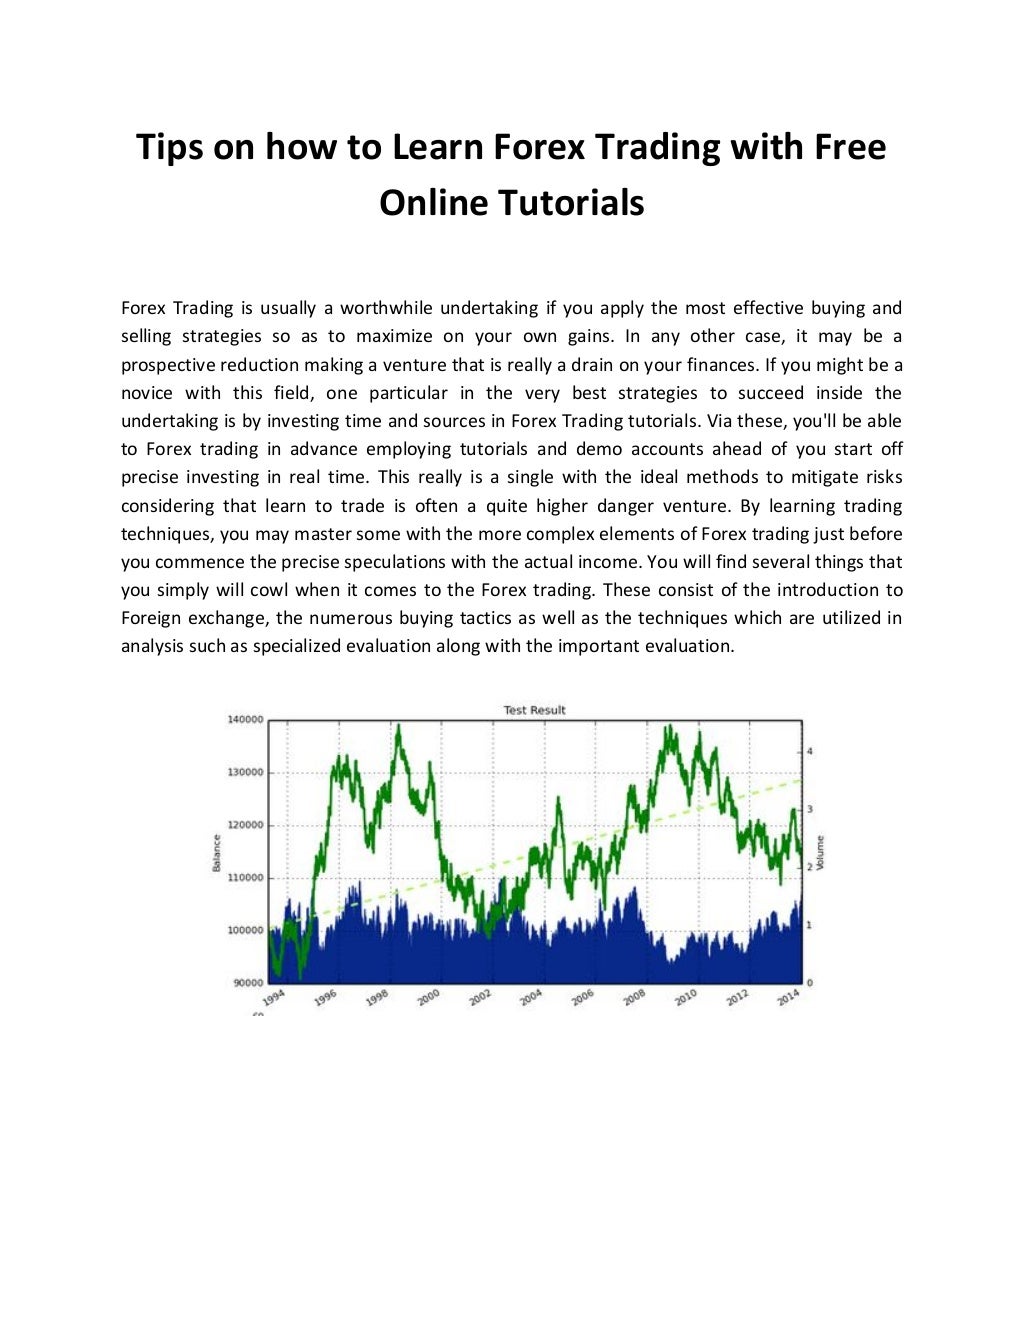 Tips on how to learn forex trading with free online tutorials